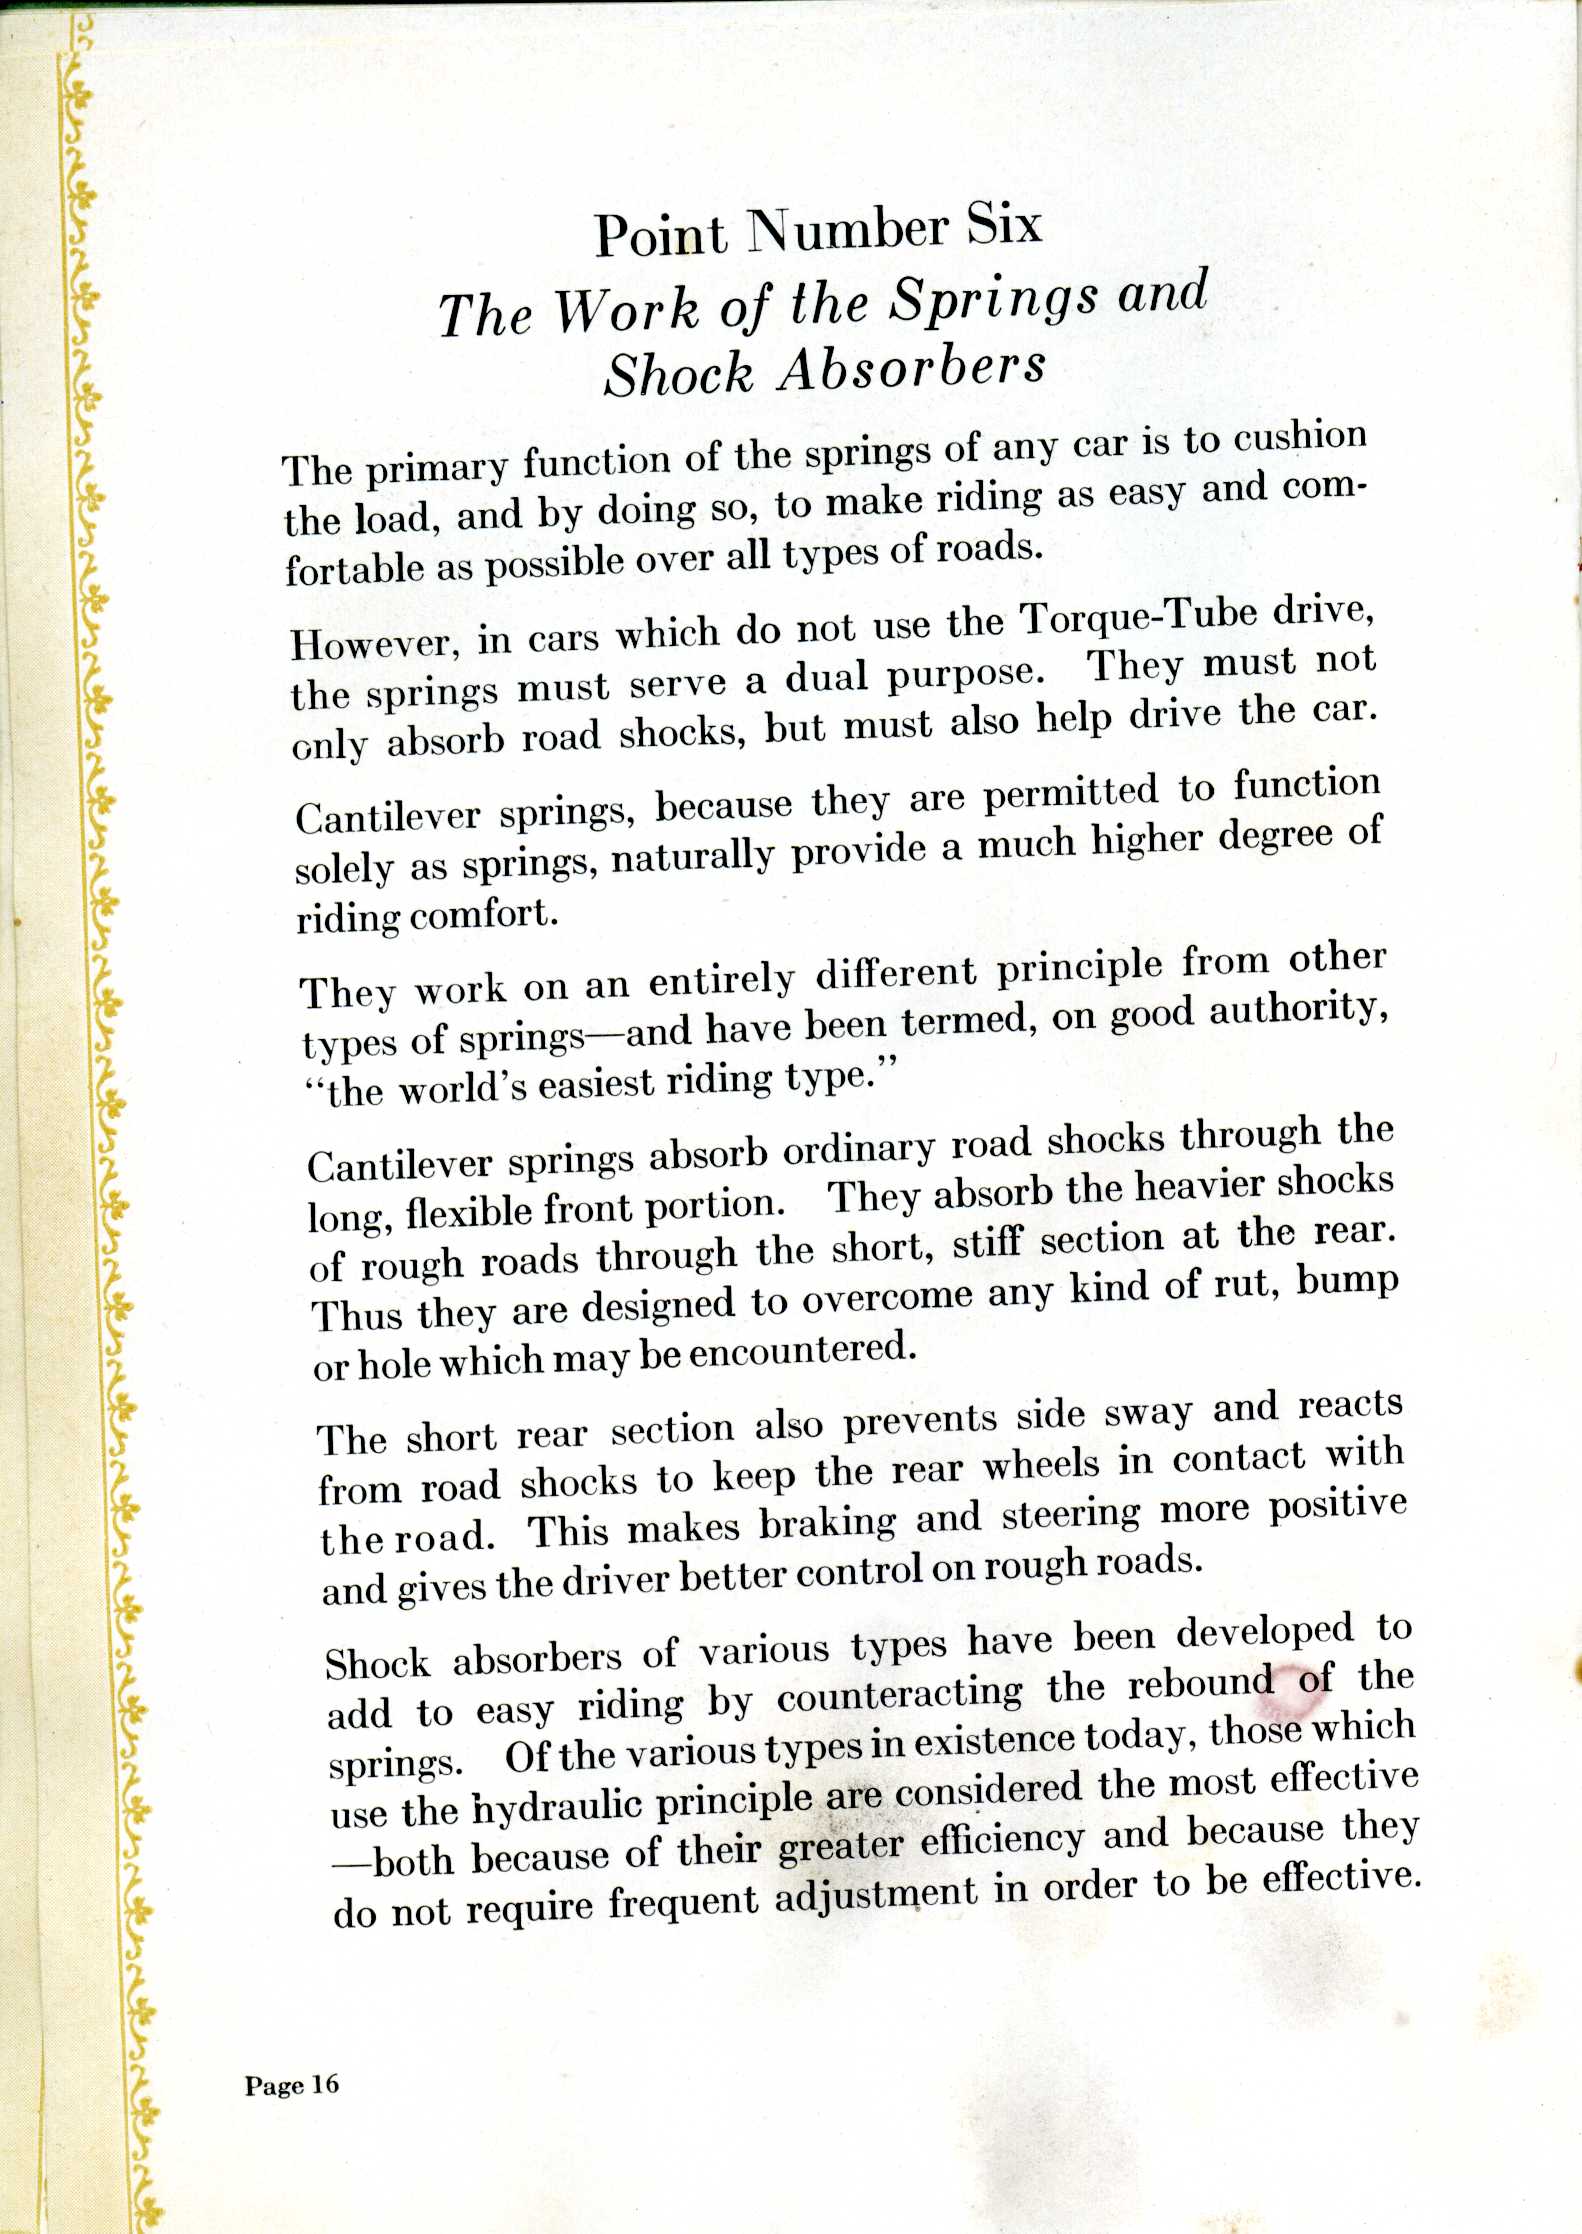 1928 Buick-How to Choose a Motor Car Wisely-16